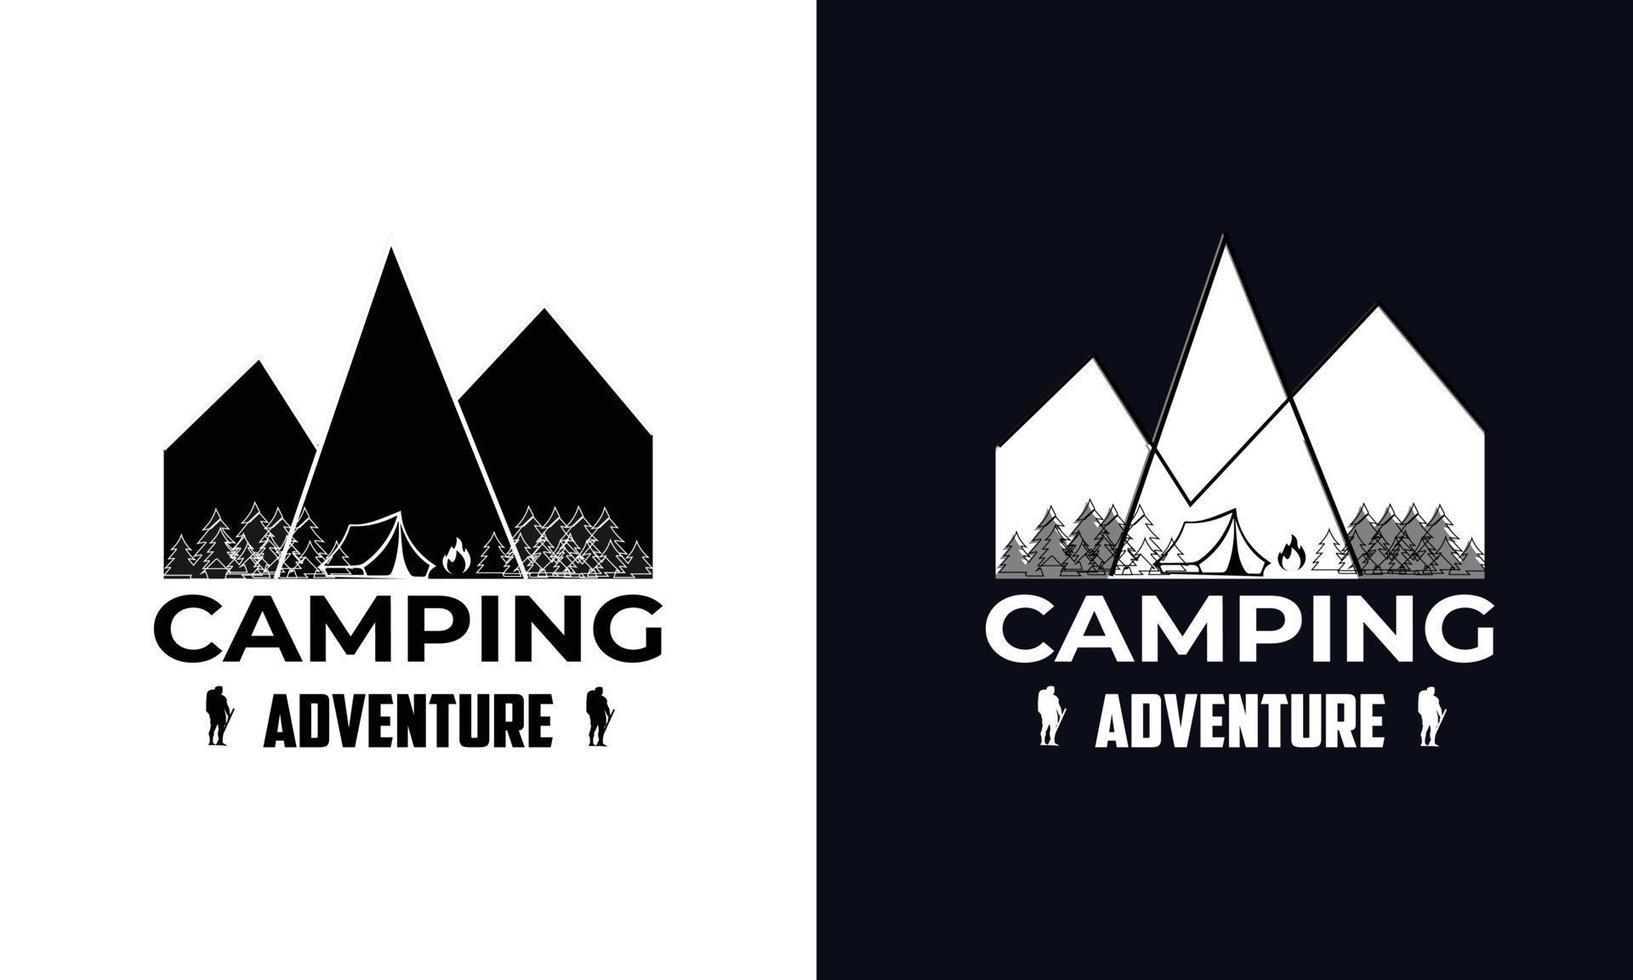 mountain logo vector. summer hiking t-shirt print design. Hand-drawn adventure logo with pine tree forest and quote - Camp Local. Old-style camp outdoors emblem in simple retro vector